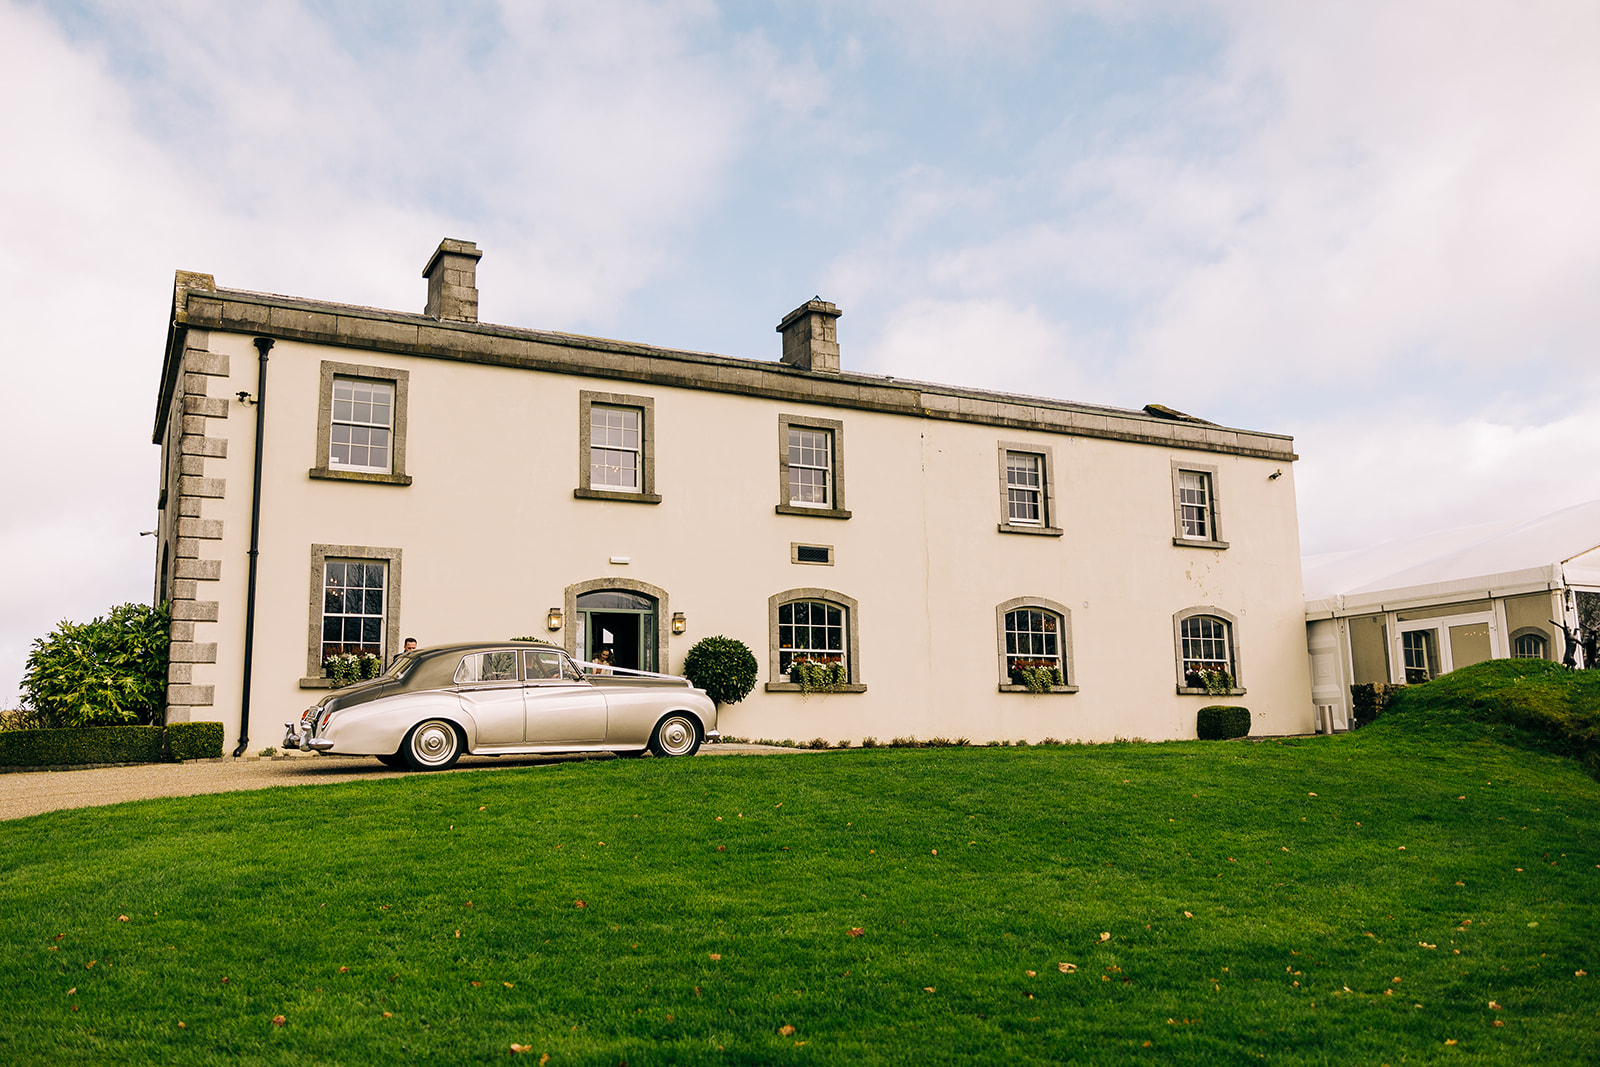 Rolls-Royce wedding car arrives at Clonabreany house